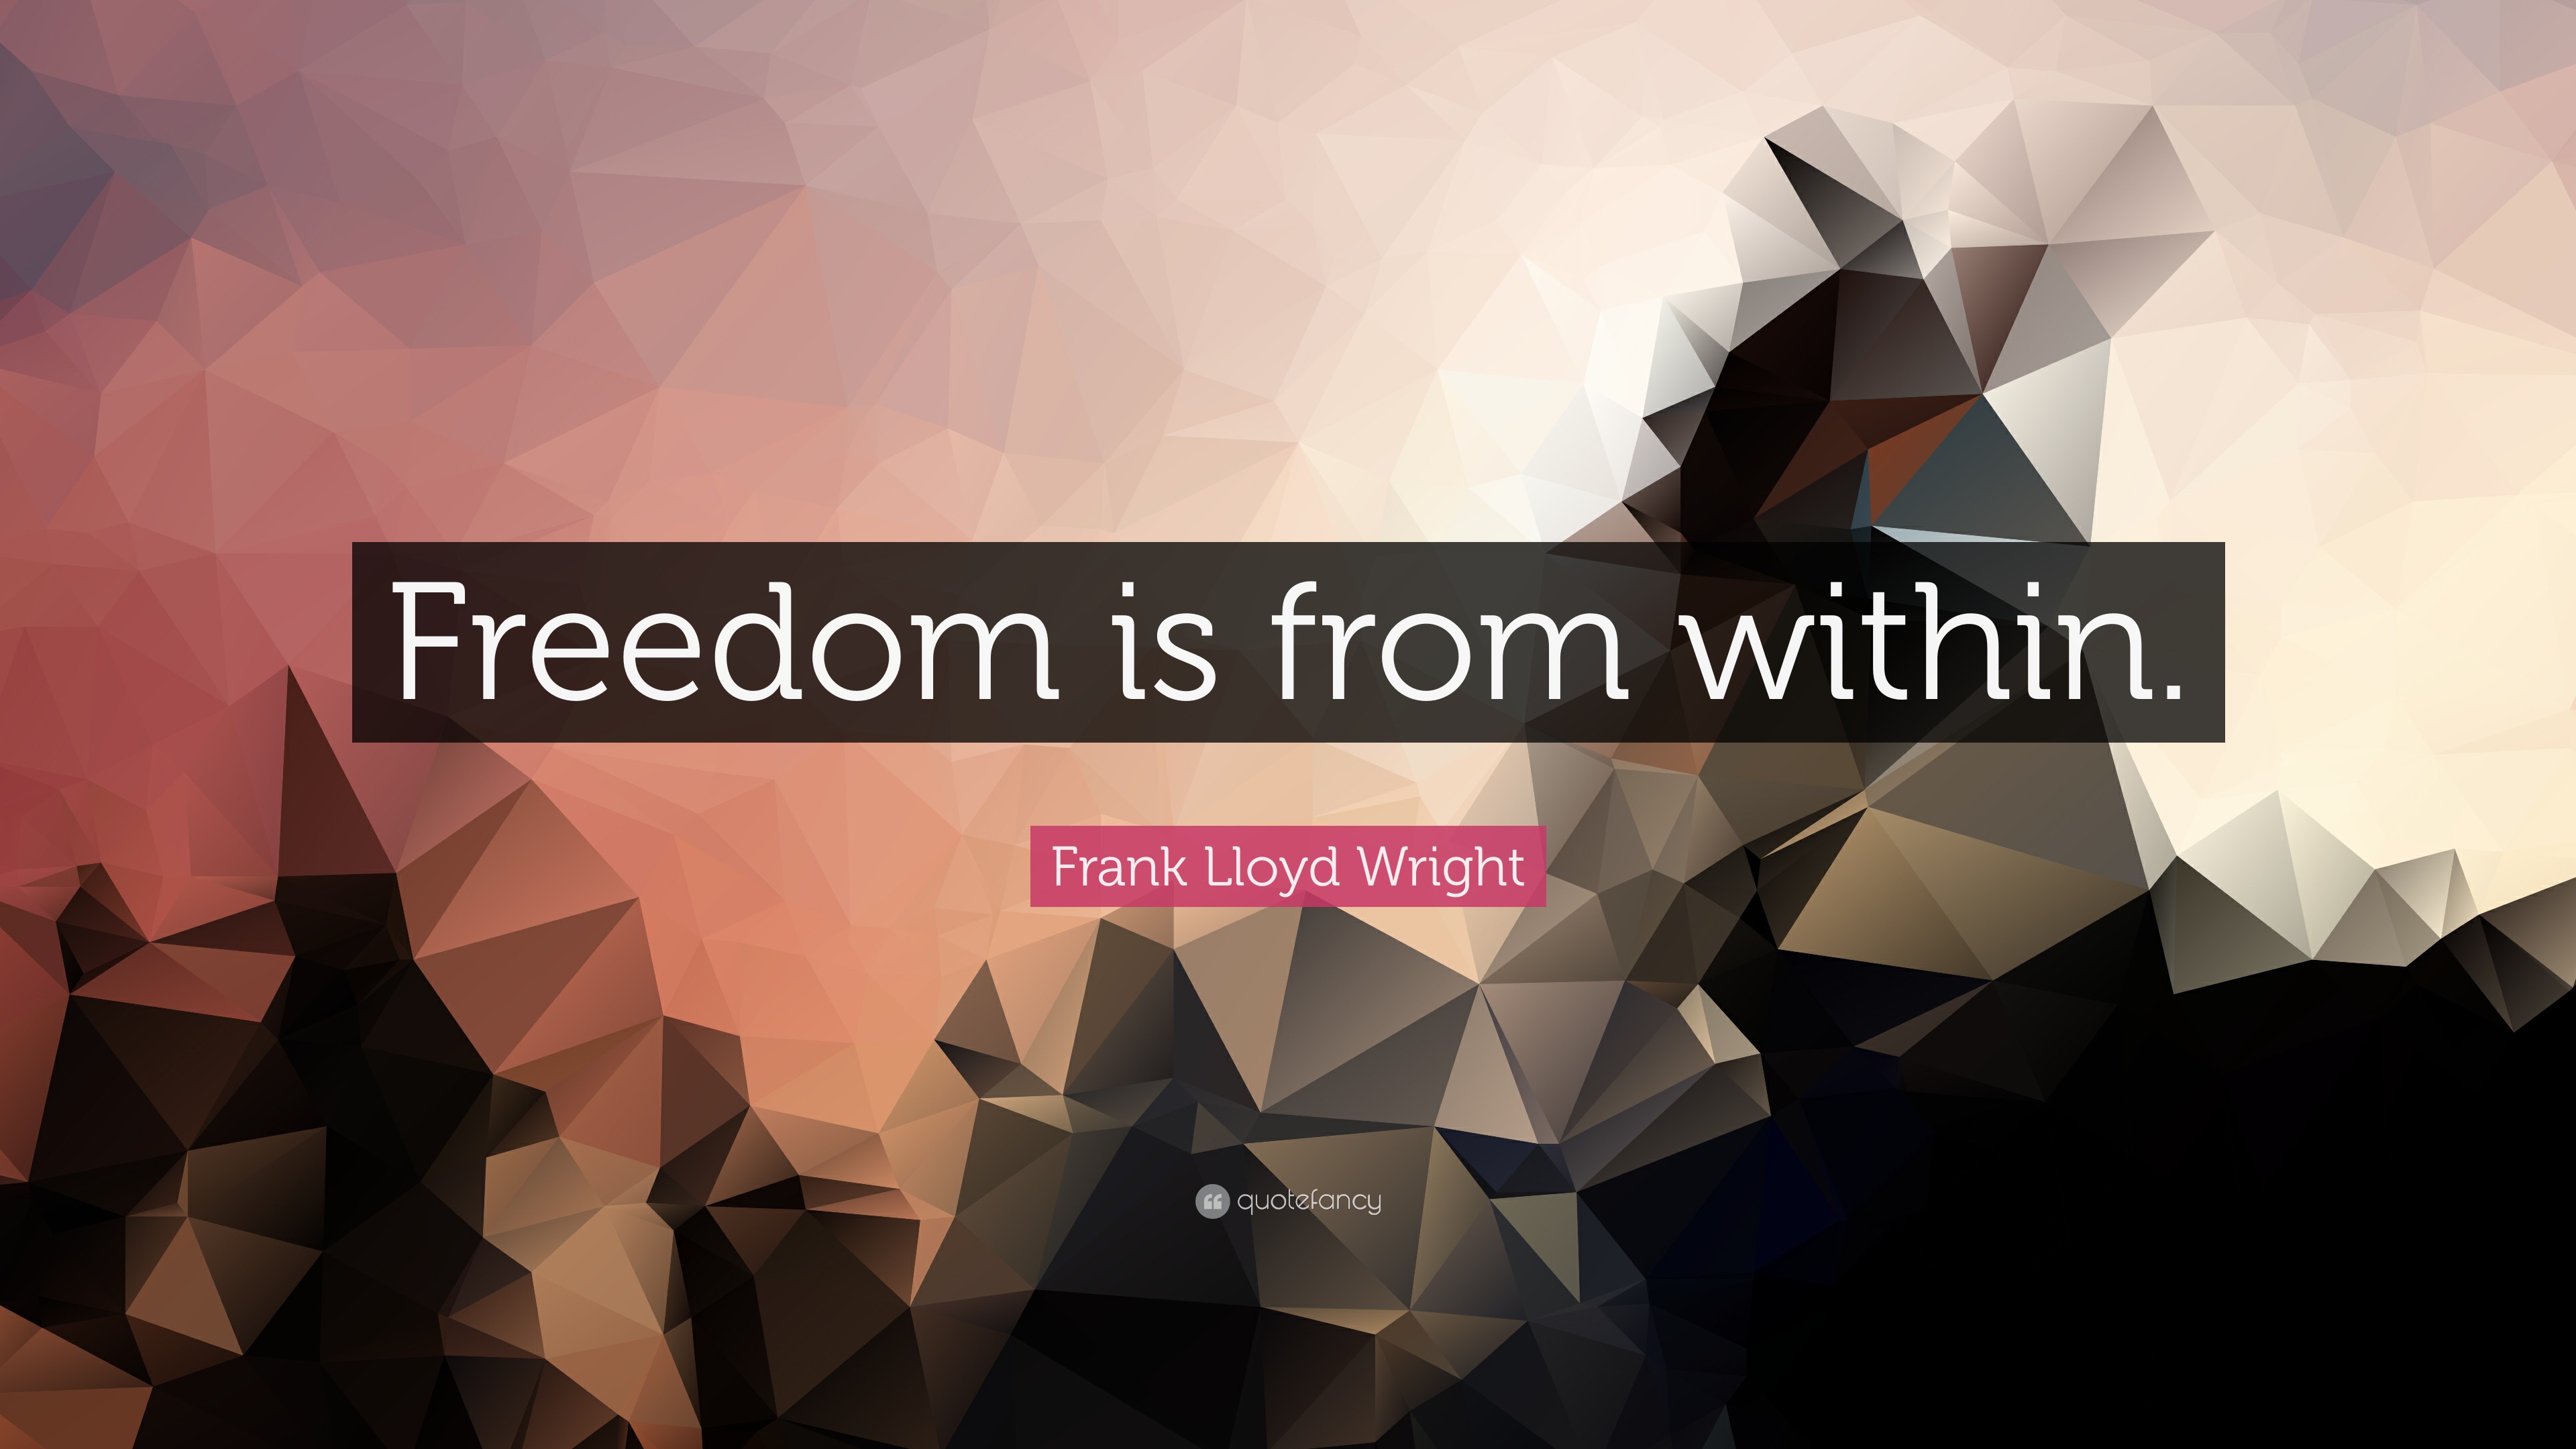 Frank Lloyd Wright Quote: “Freedom is from within.”